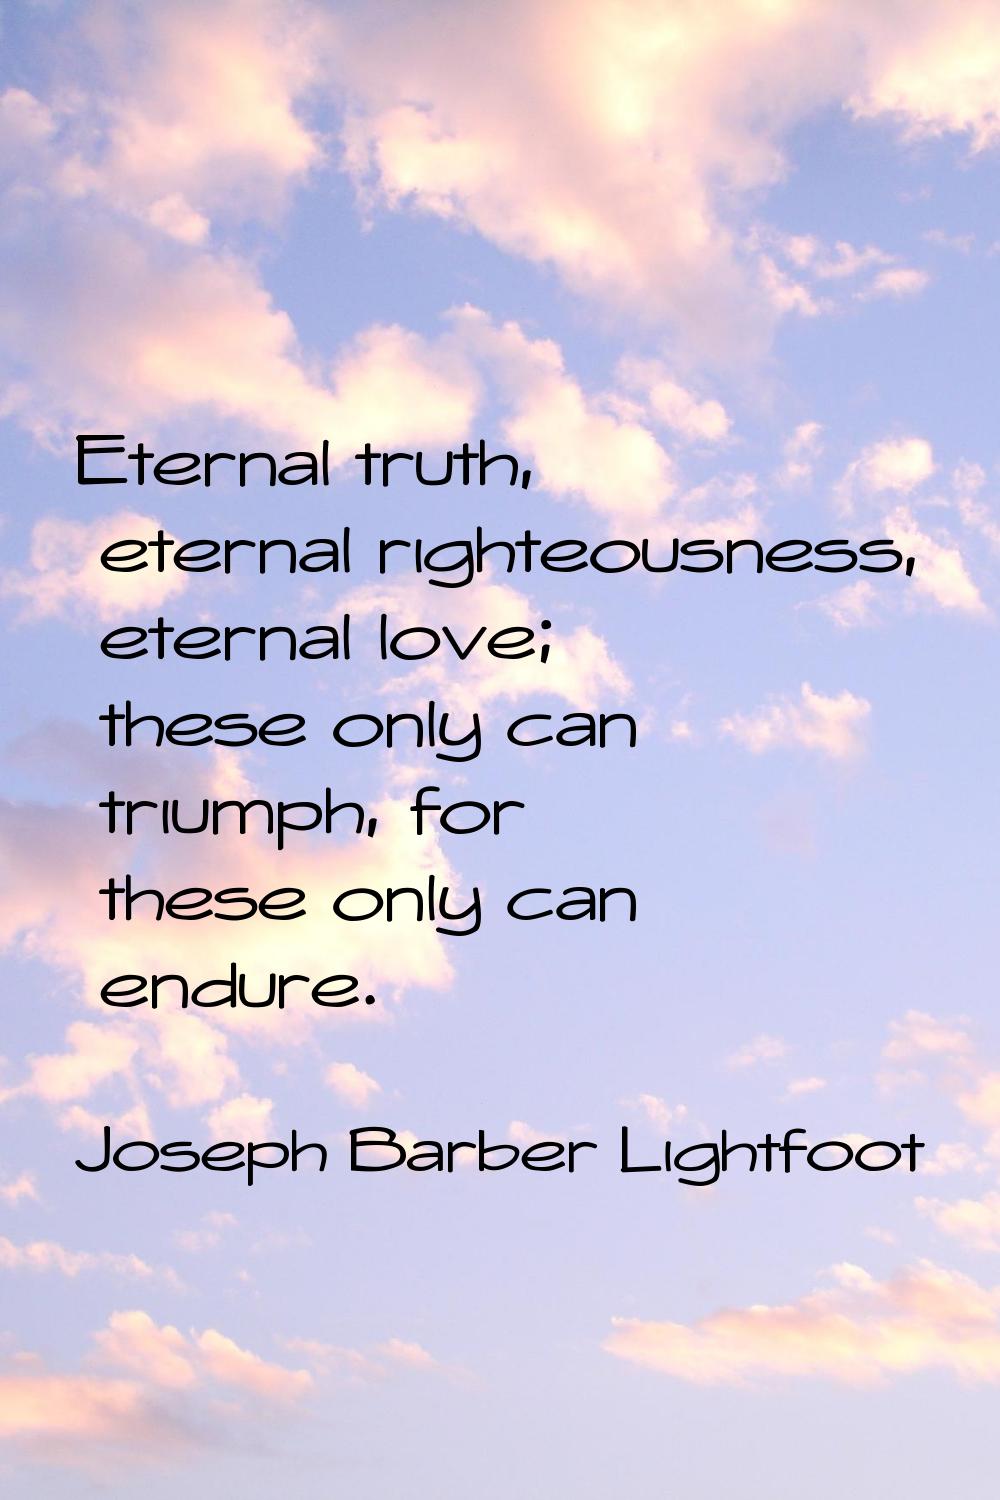 Eternal truth, eternal righteousness, eternal love; these only can triumph, for these only can endu